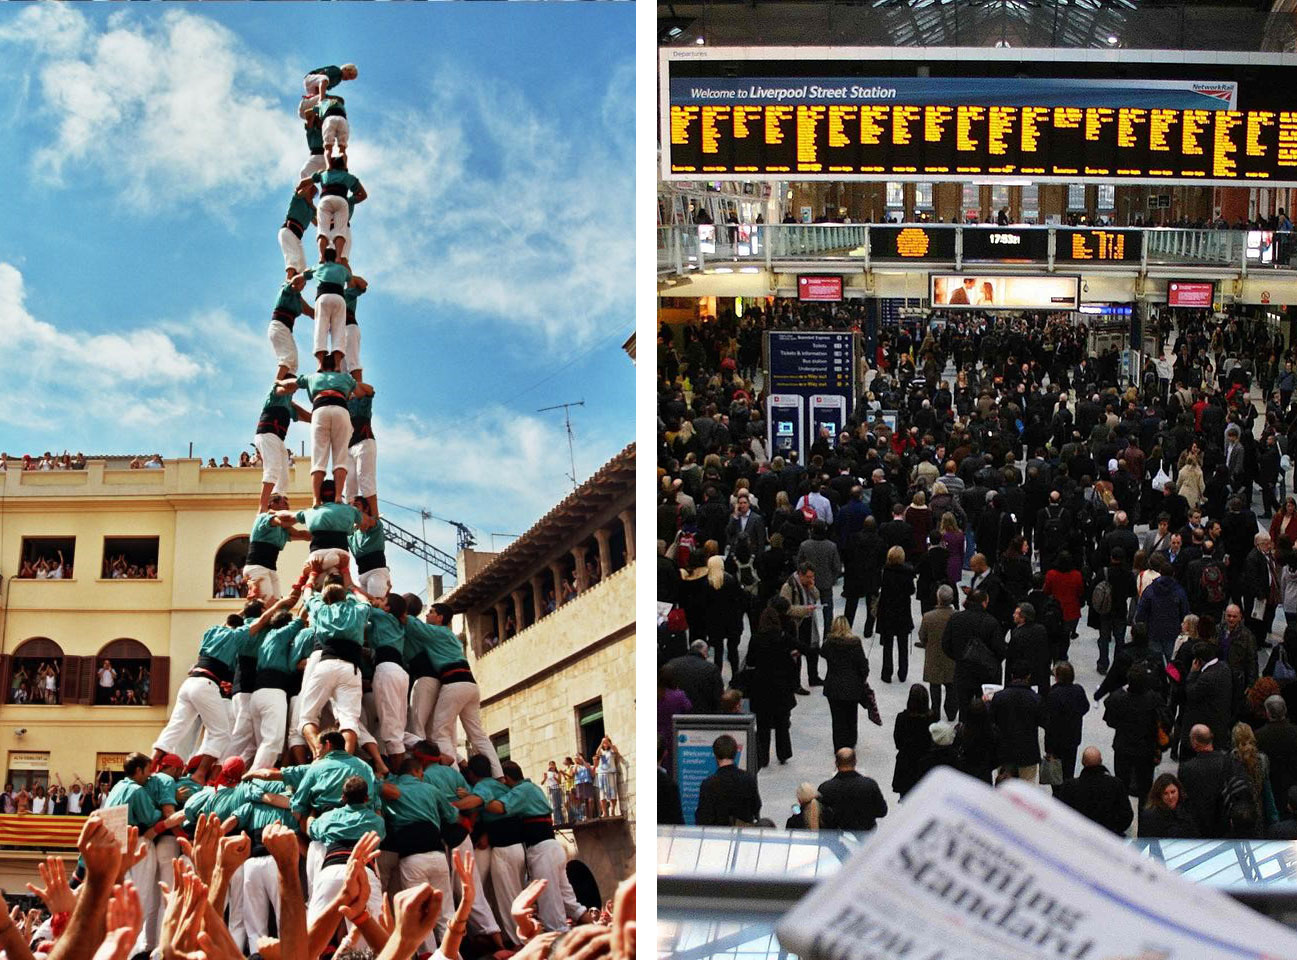 Two photos showing the Casteller human-tower to the left and Liverpool Street Station to the right.